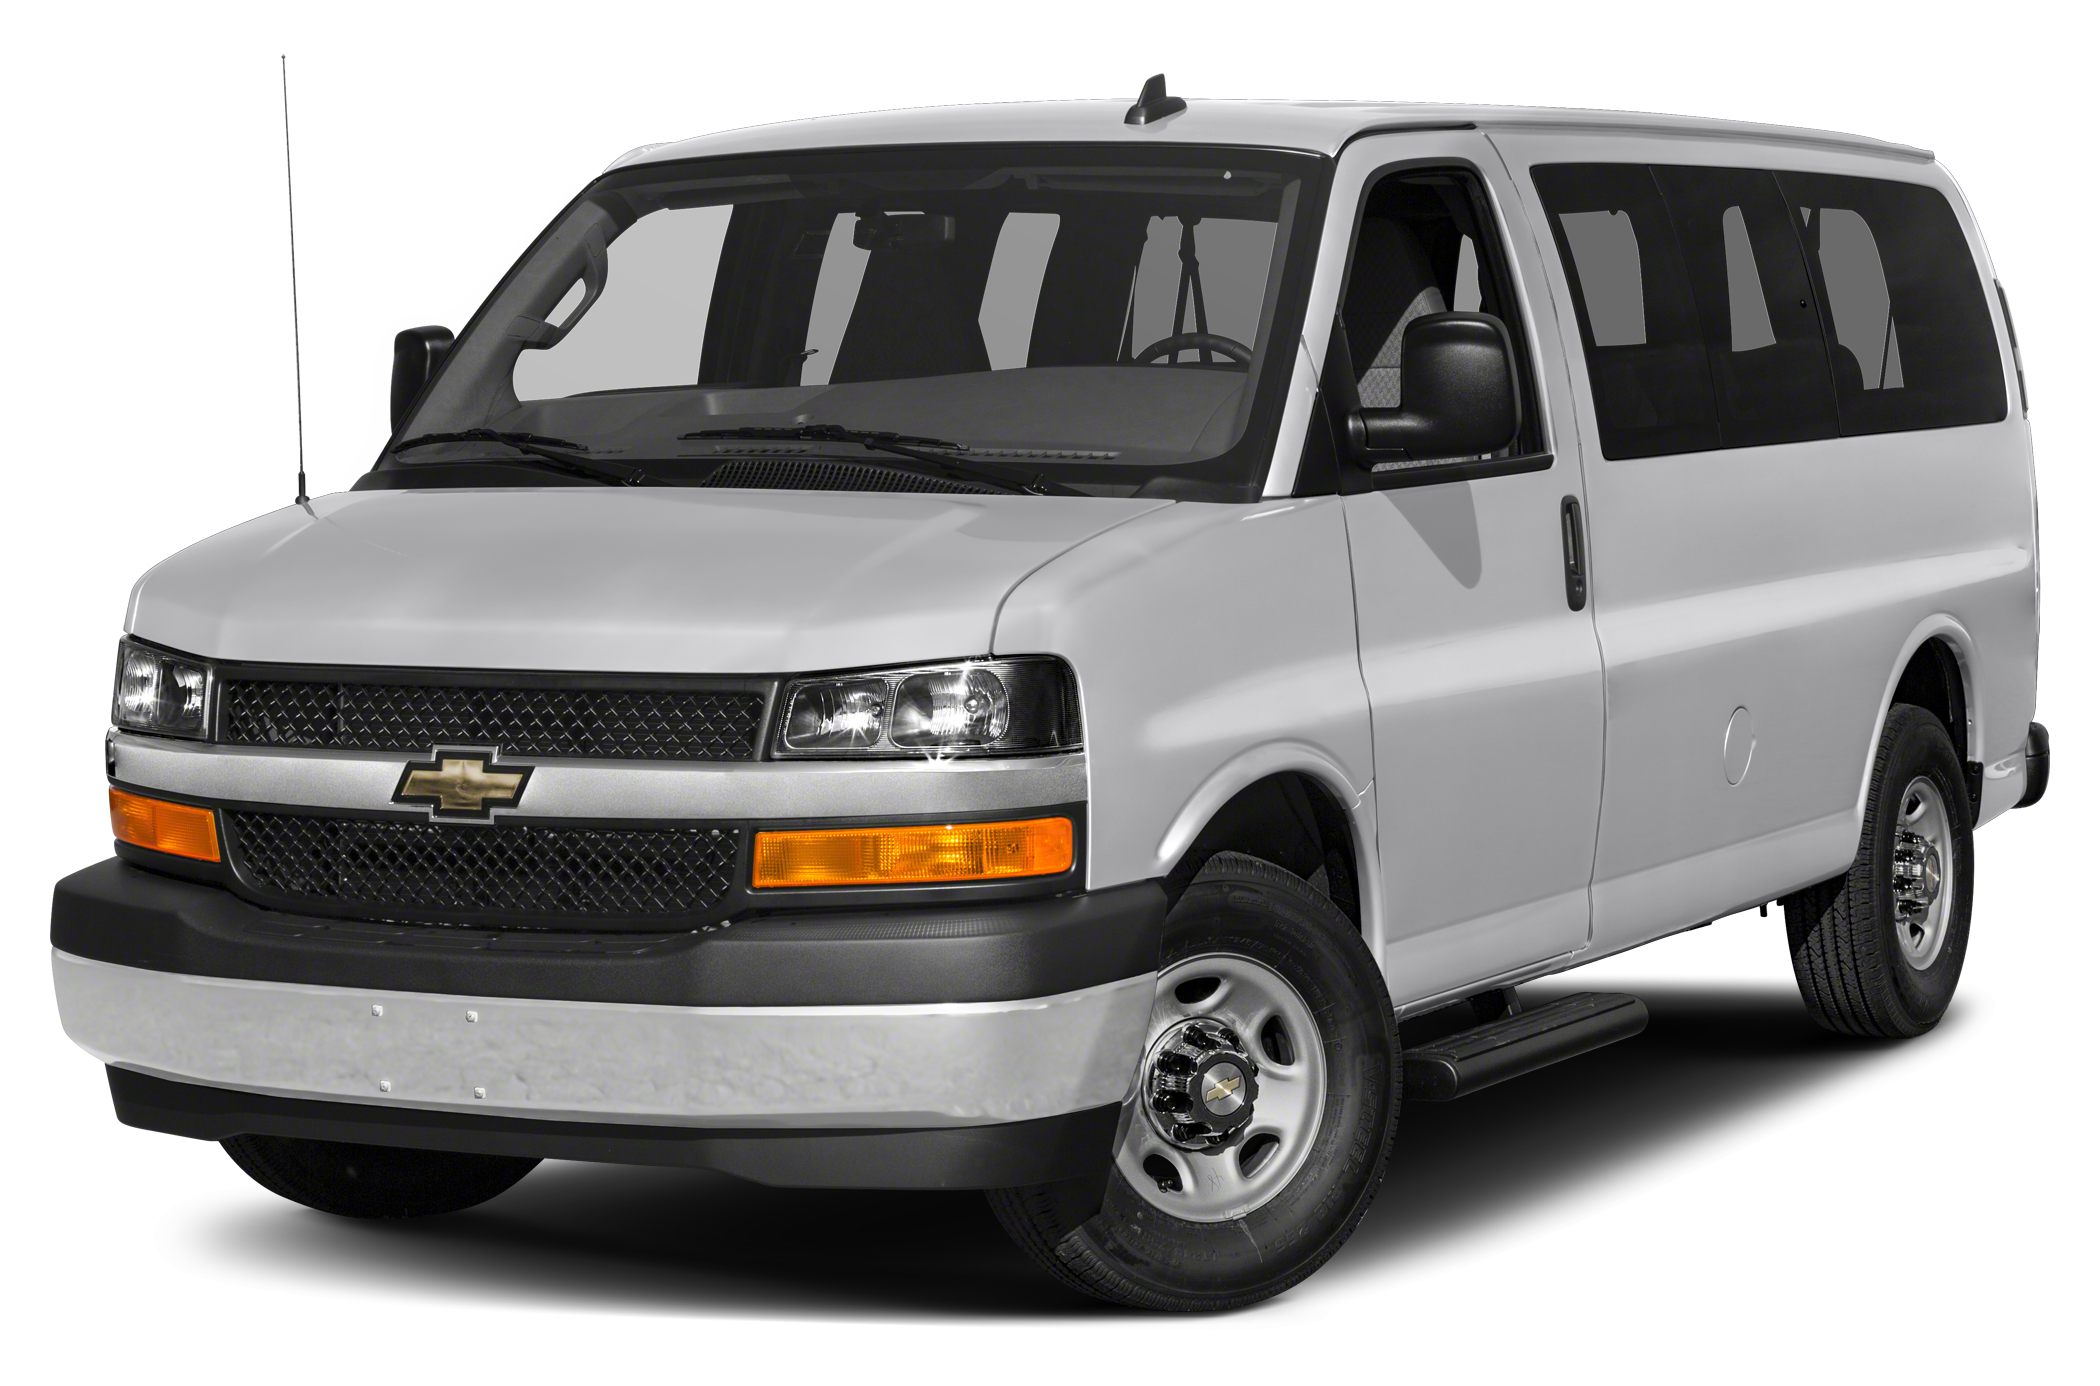 2015 Chevrolet Express 3500 Specs and 